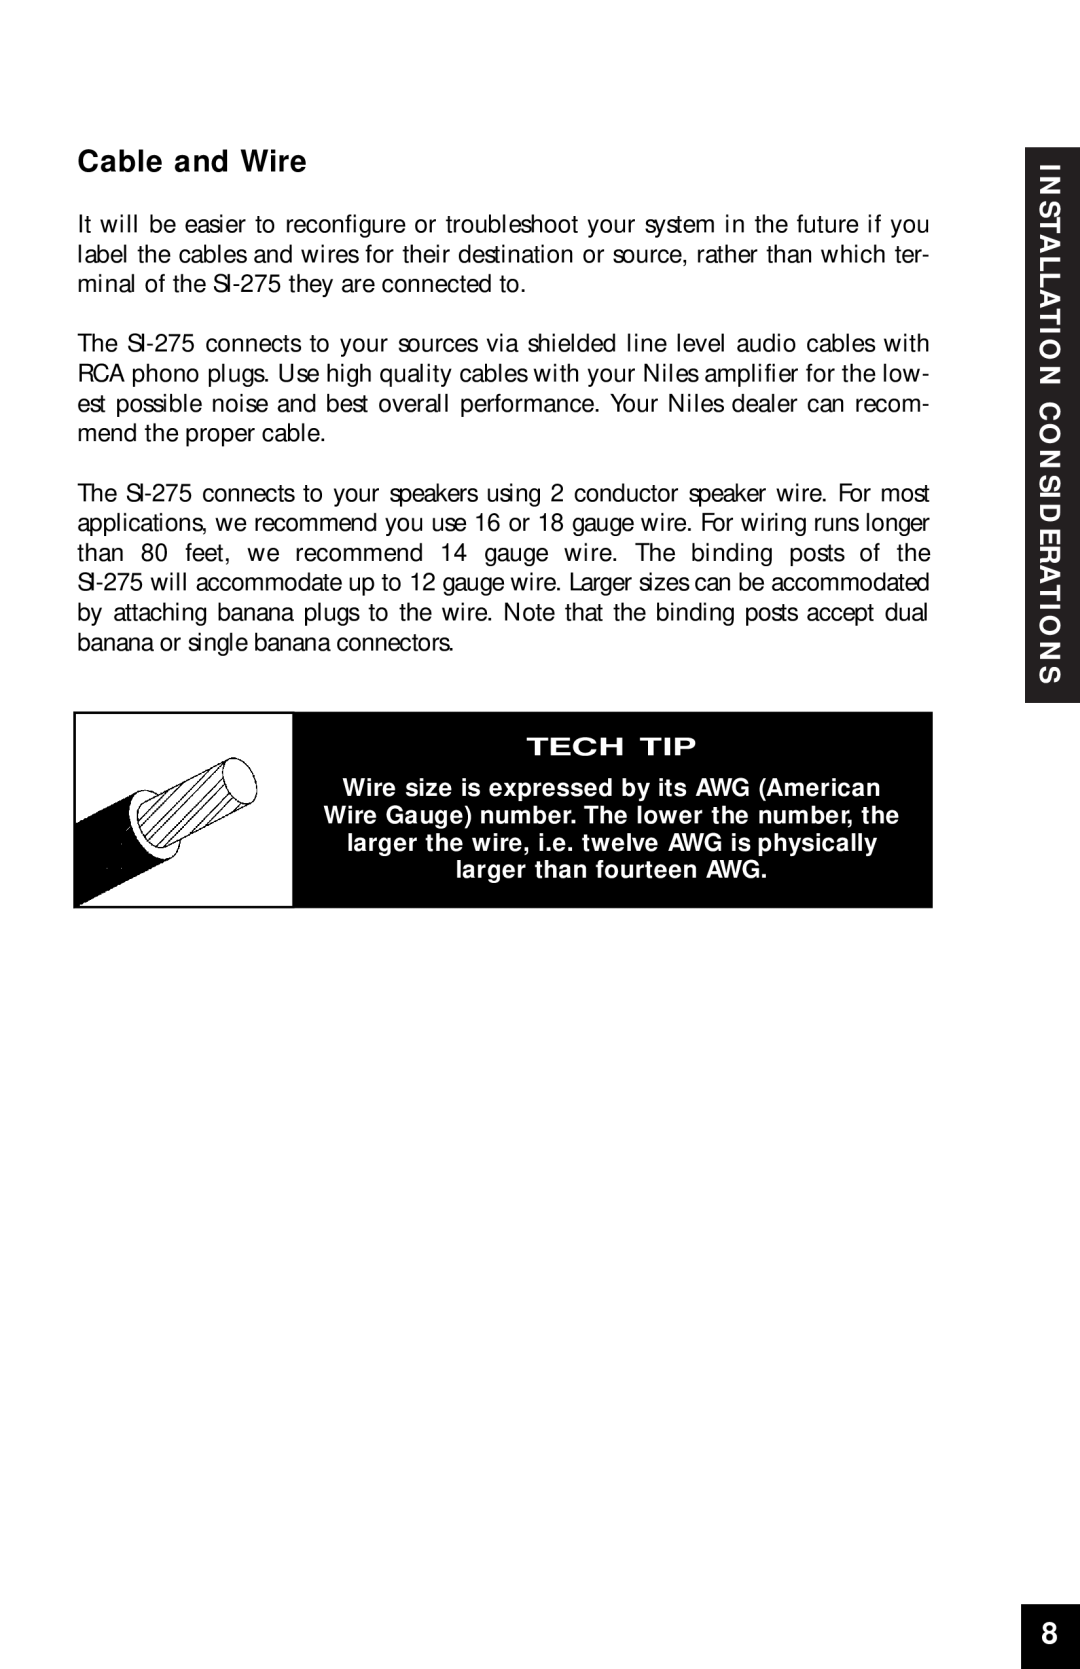 Niles Audio SI-275 manual Cable and Wire, Tech Tip, Installation Considerations 